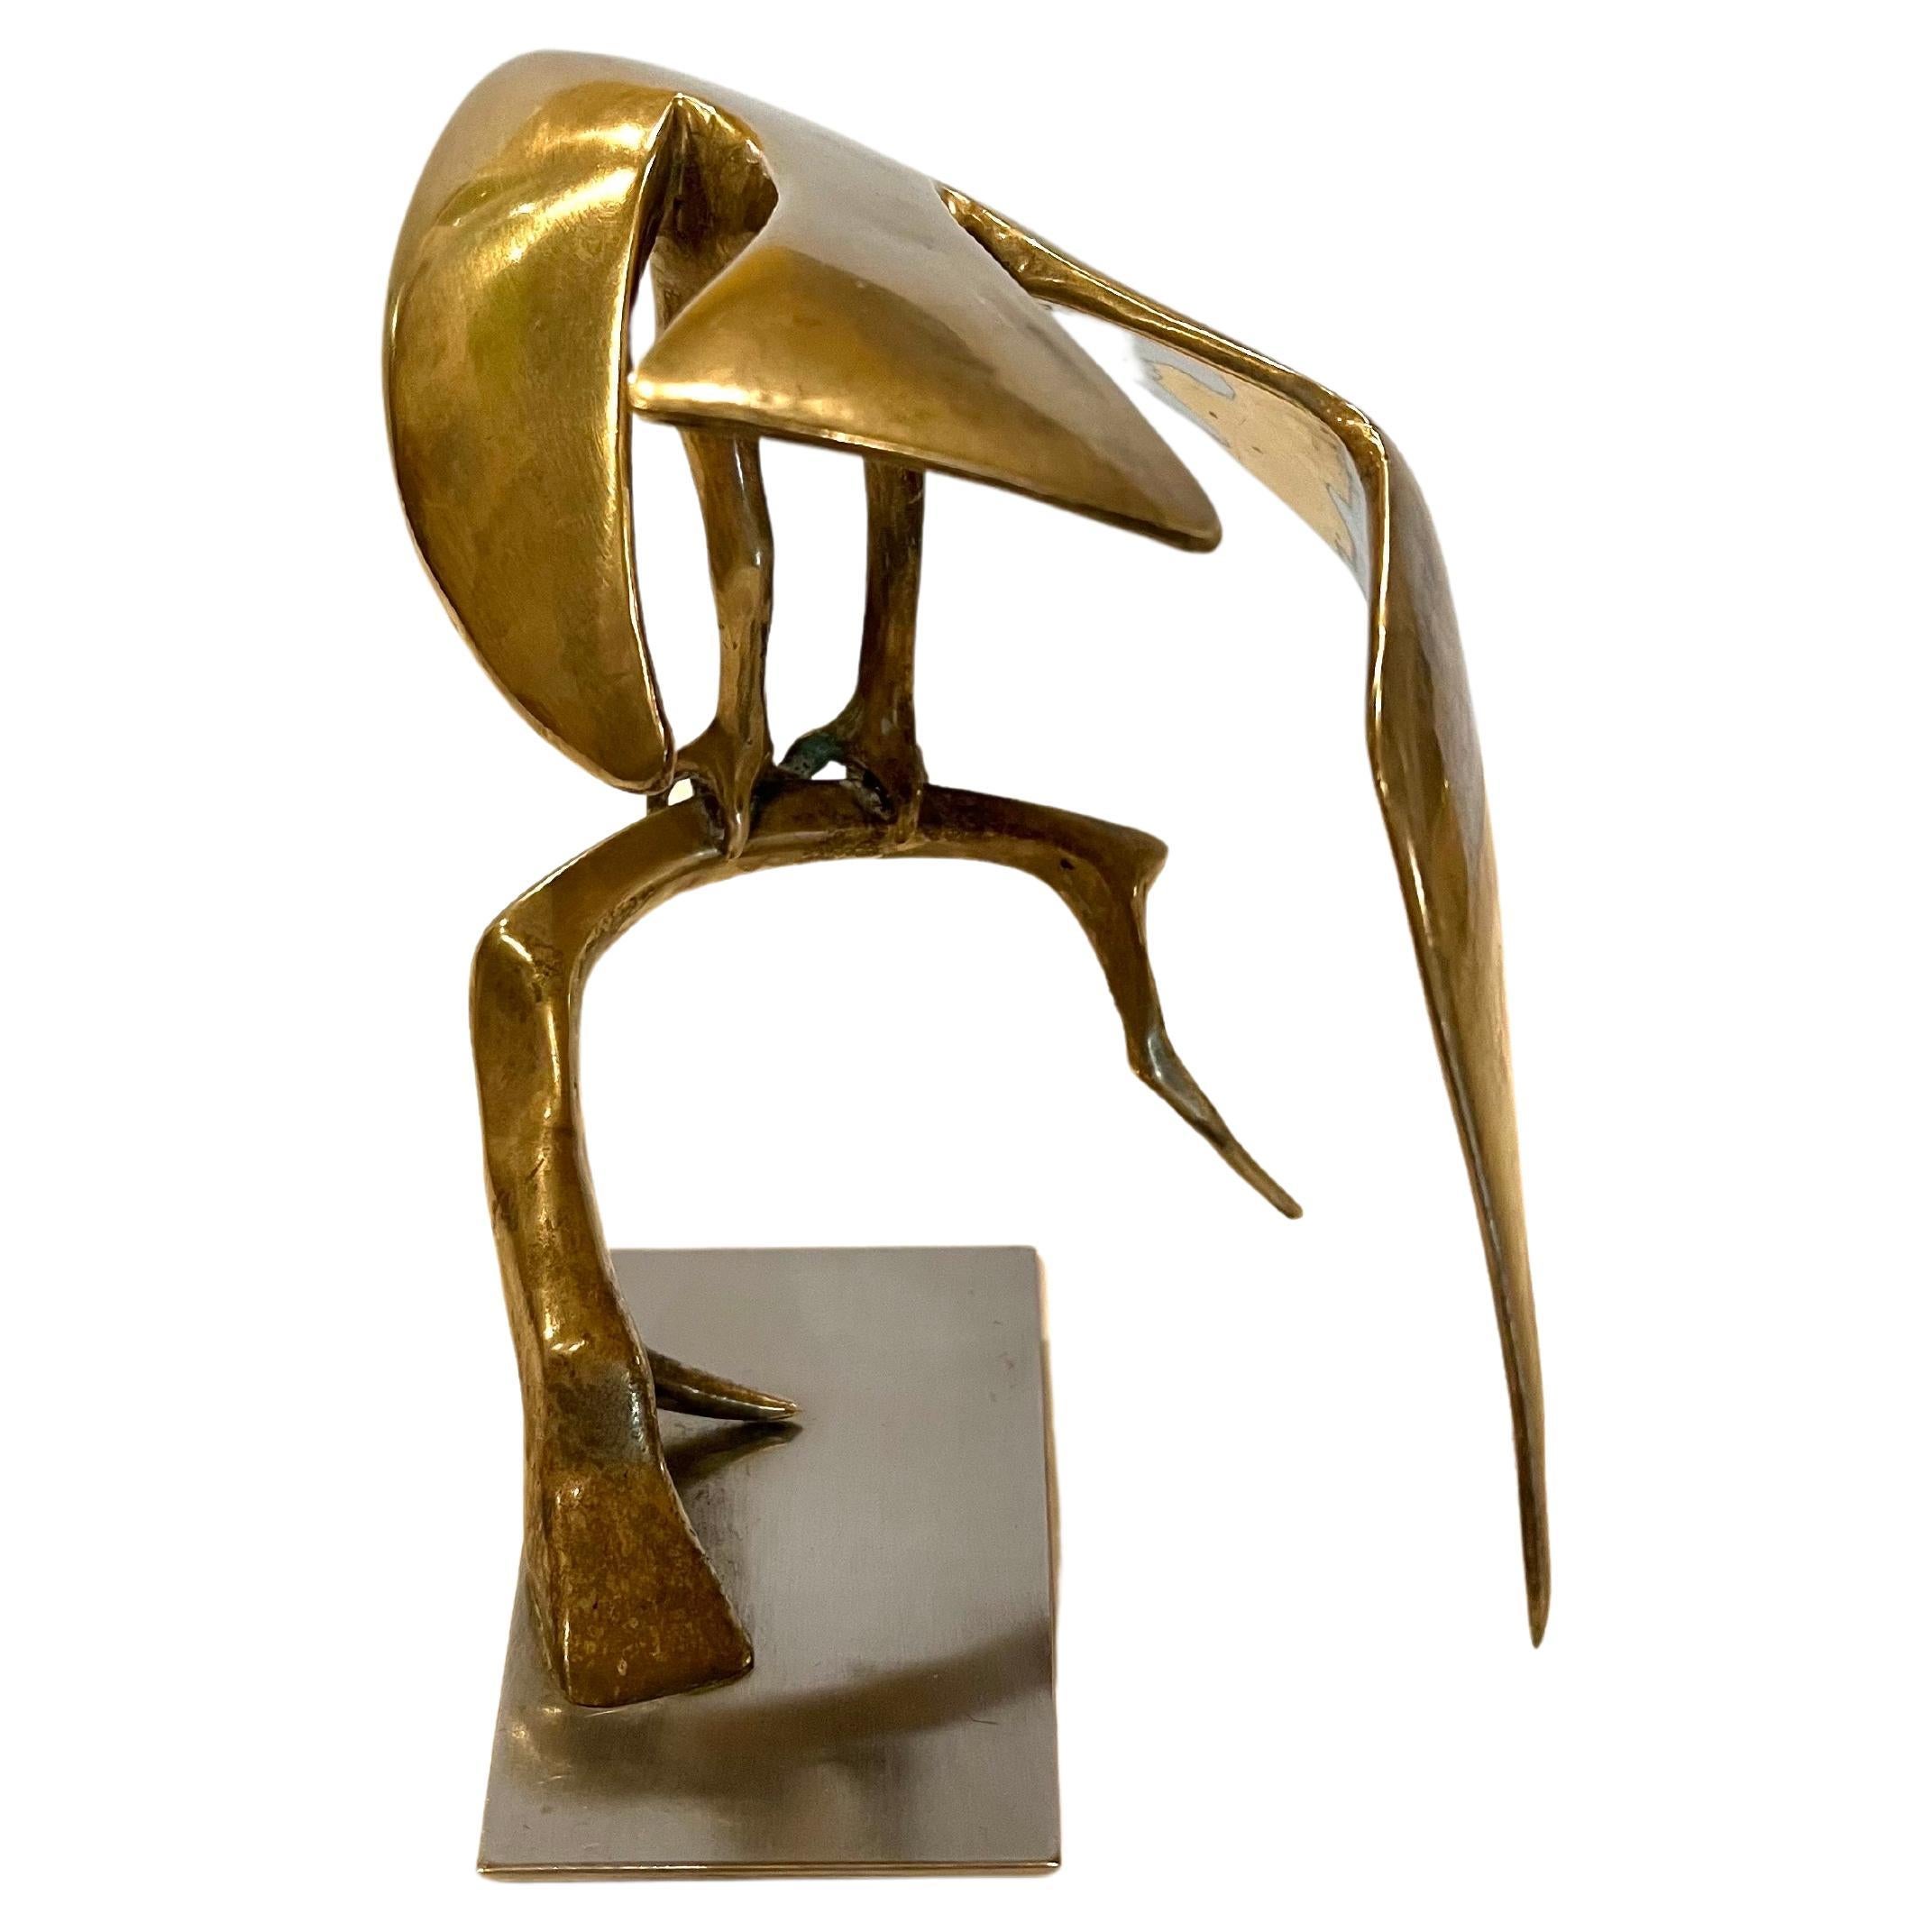 Beautiful American Eagle in solid bronze, resting on a branch sitting on a solid stainless steel base gorgeous piece, unsigned with great quality.